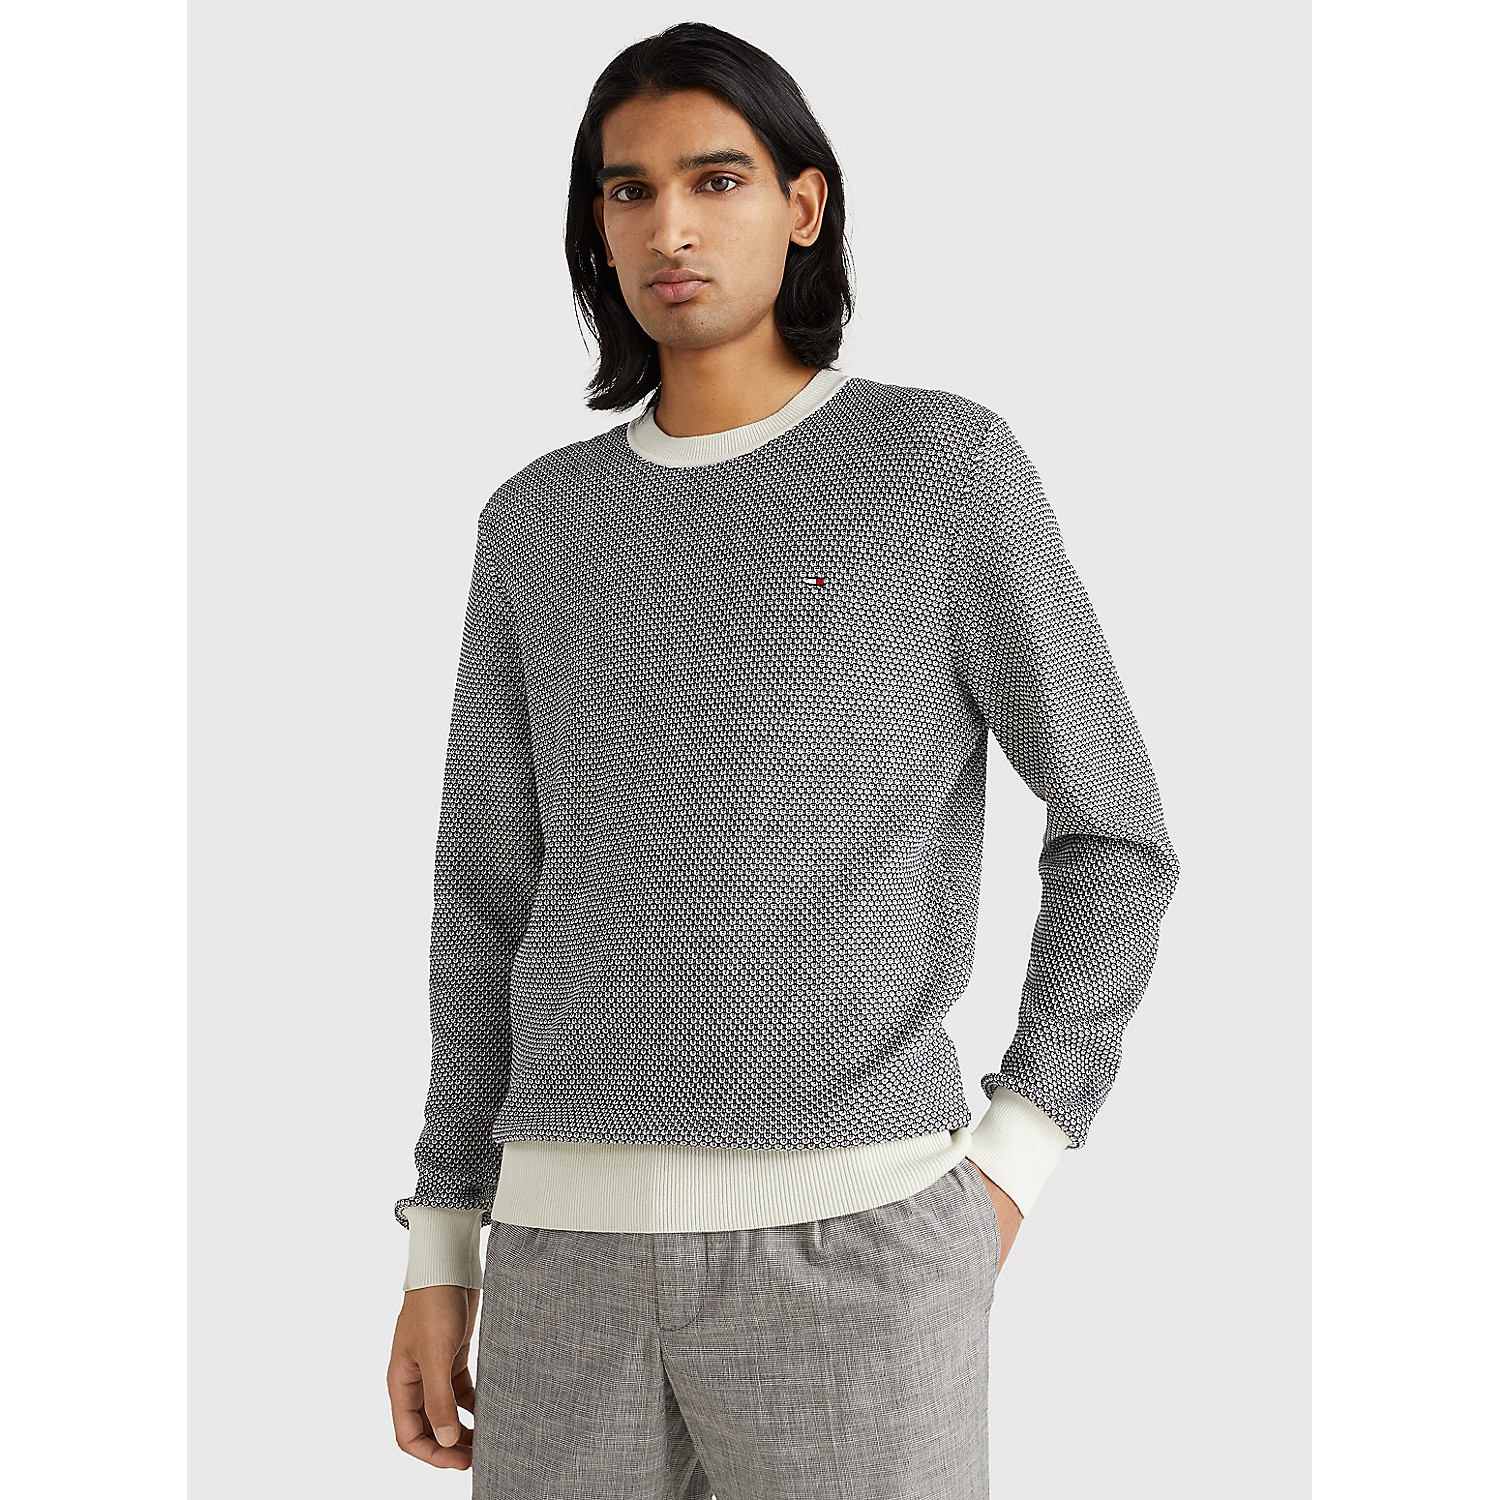 TOMMY HILFIGER Tonal Textured Sweater